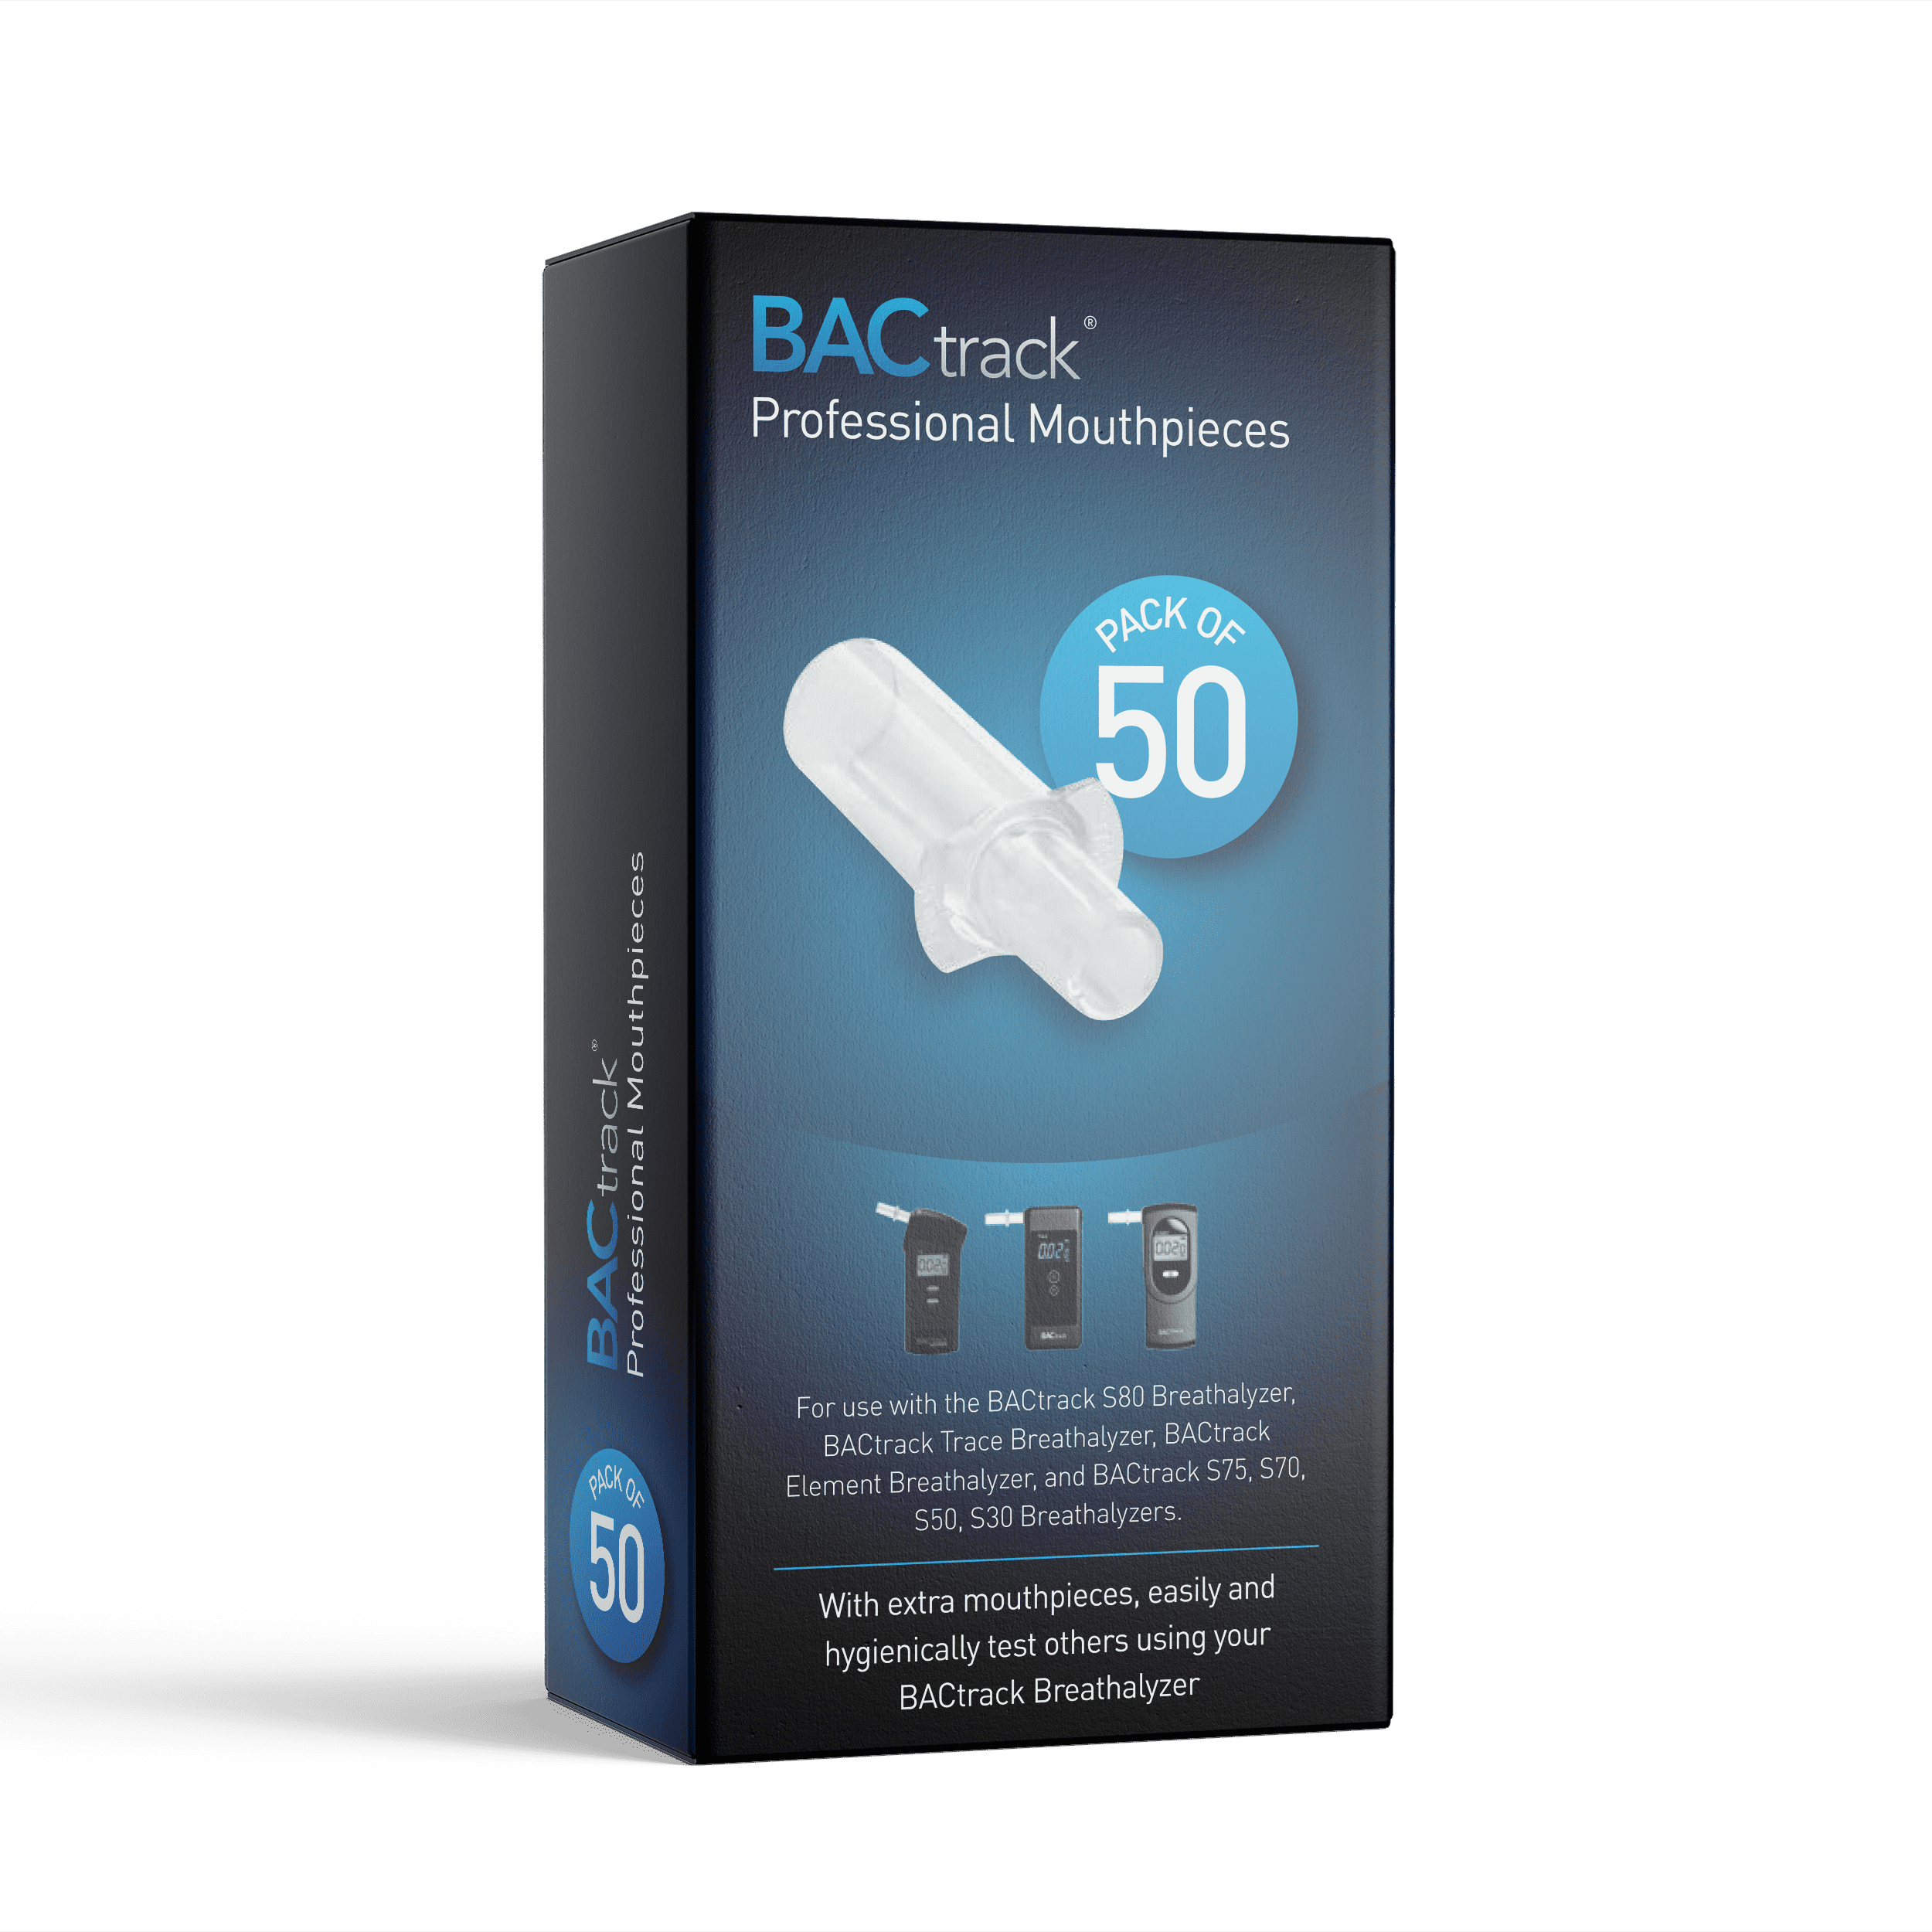 BACtrack Professional Mouthpieces - 50 Pack